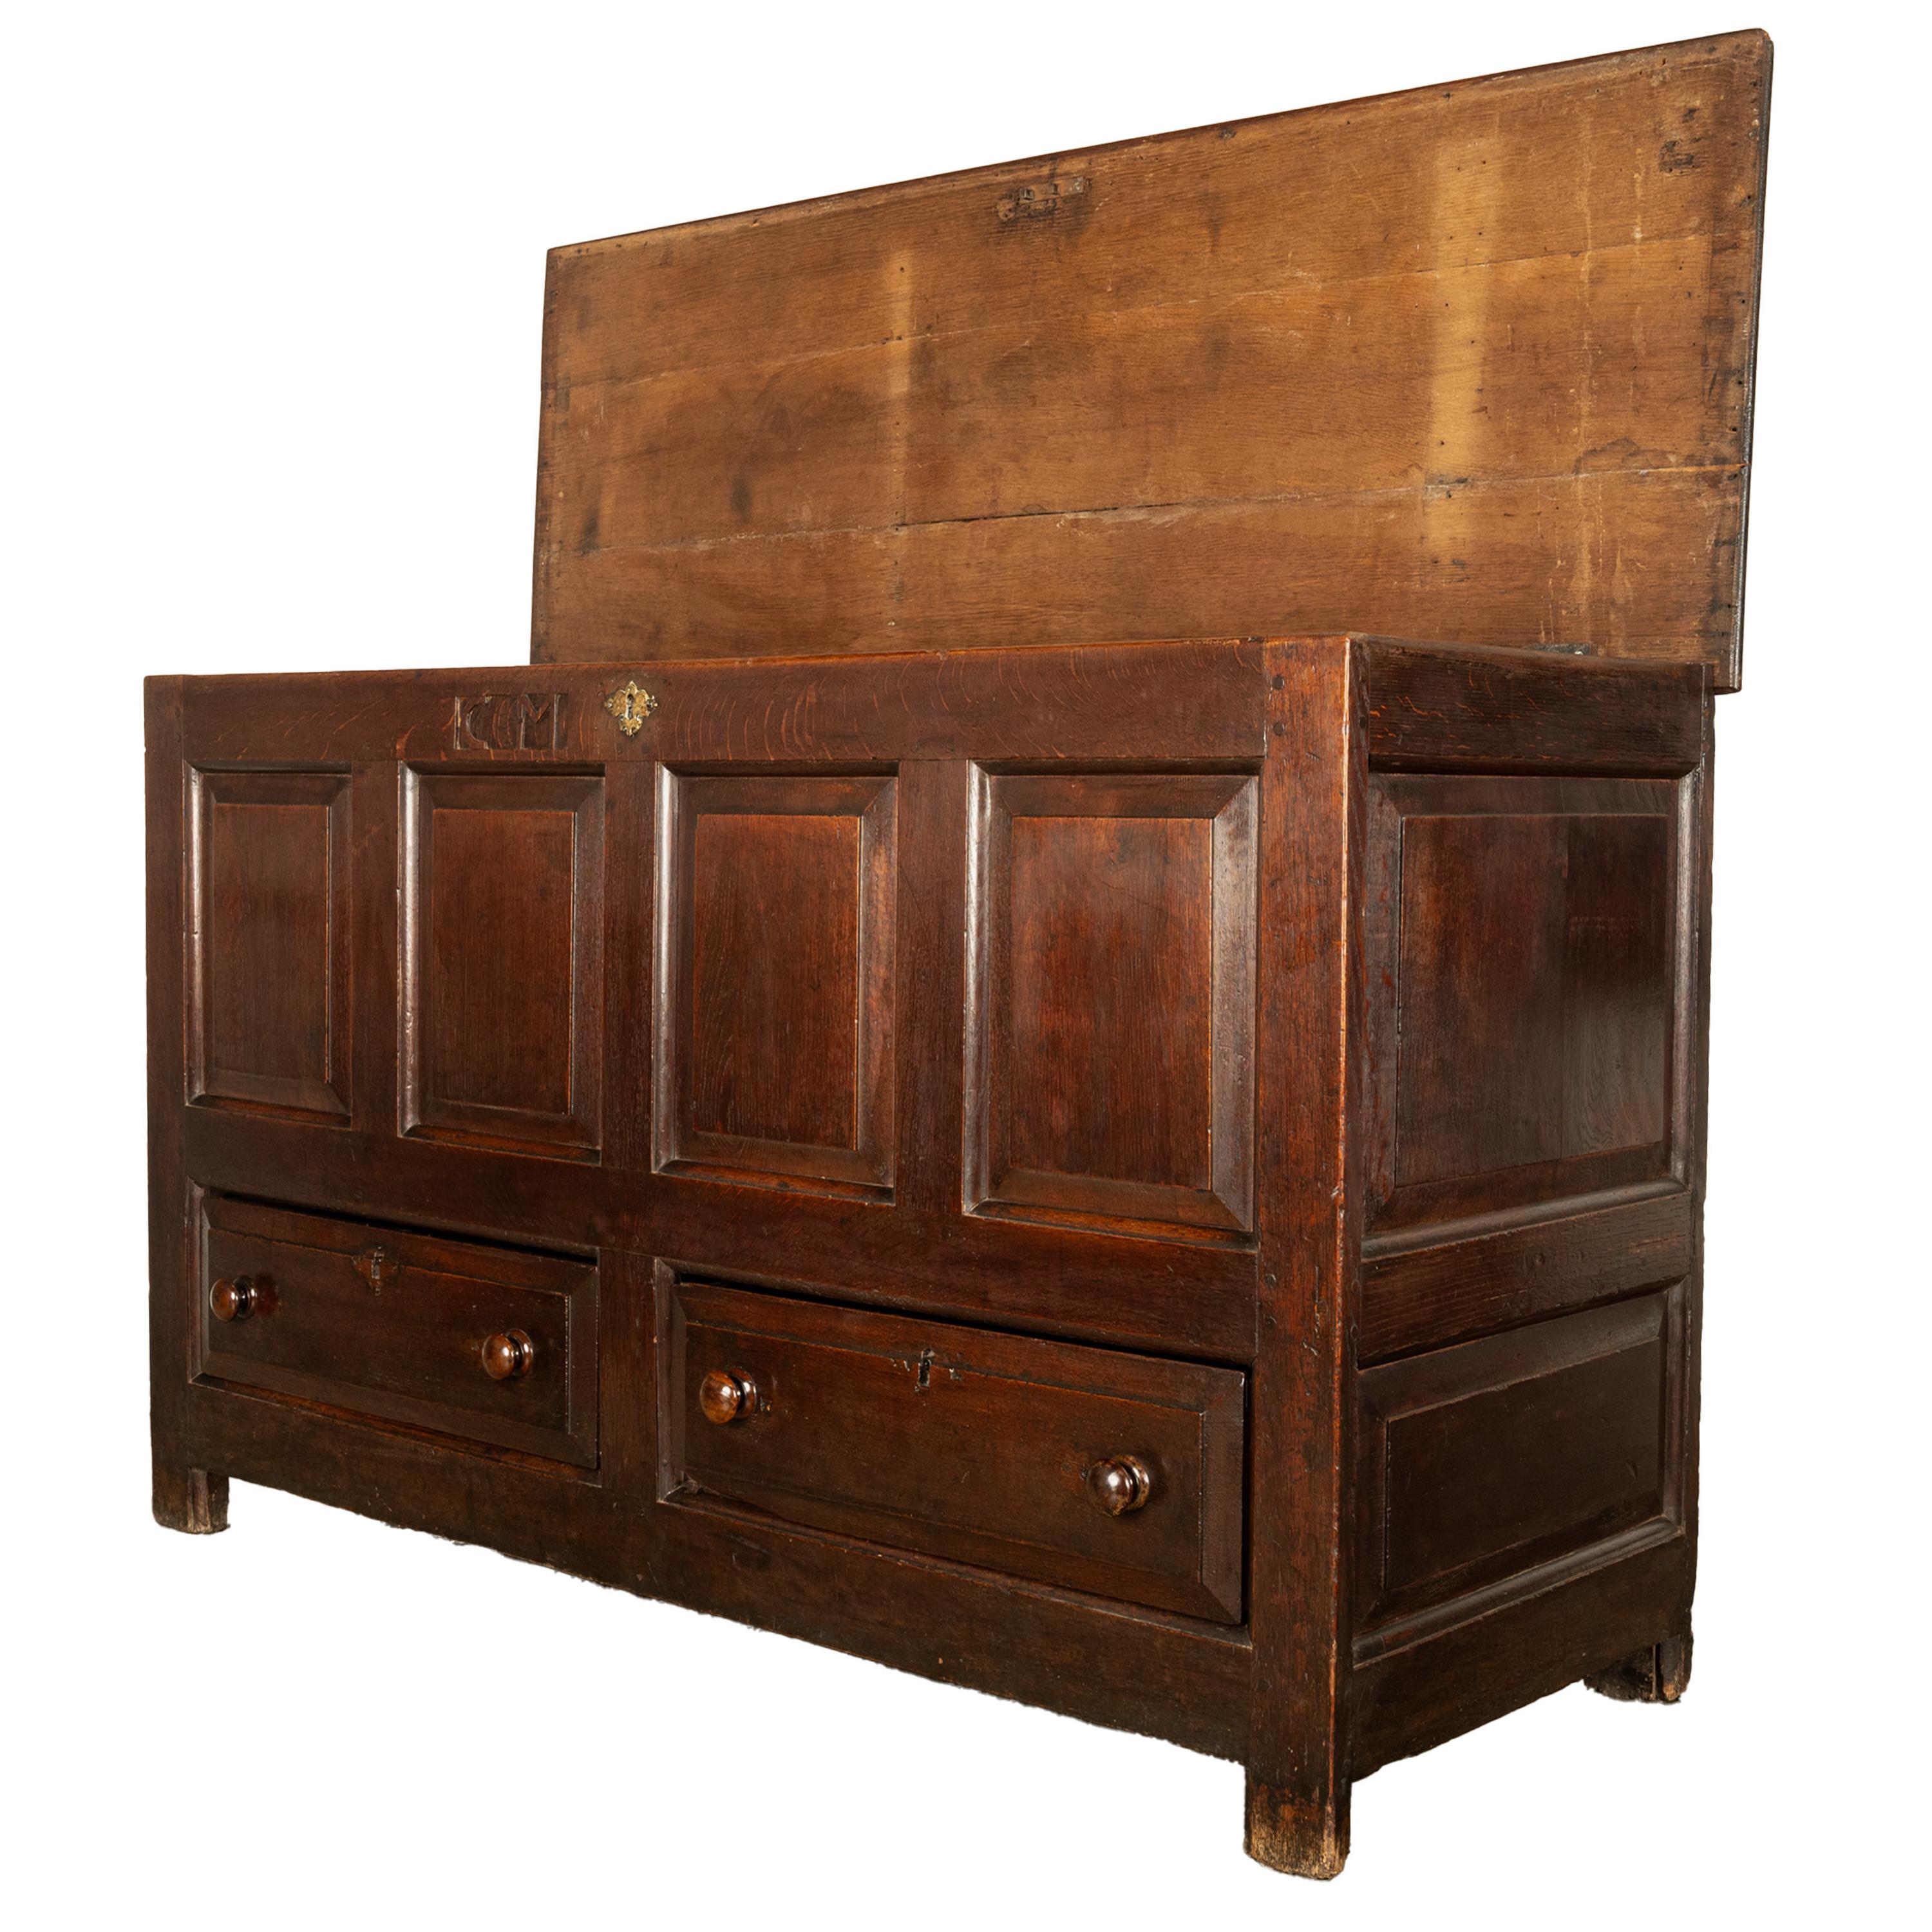 Monumental Antique Georgian Joined Oak Mule Dowry Chest Coffer Yorkshire 1720 For Sale 2